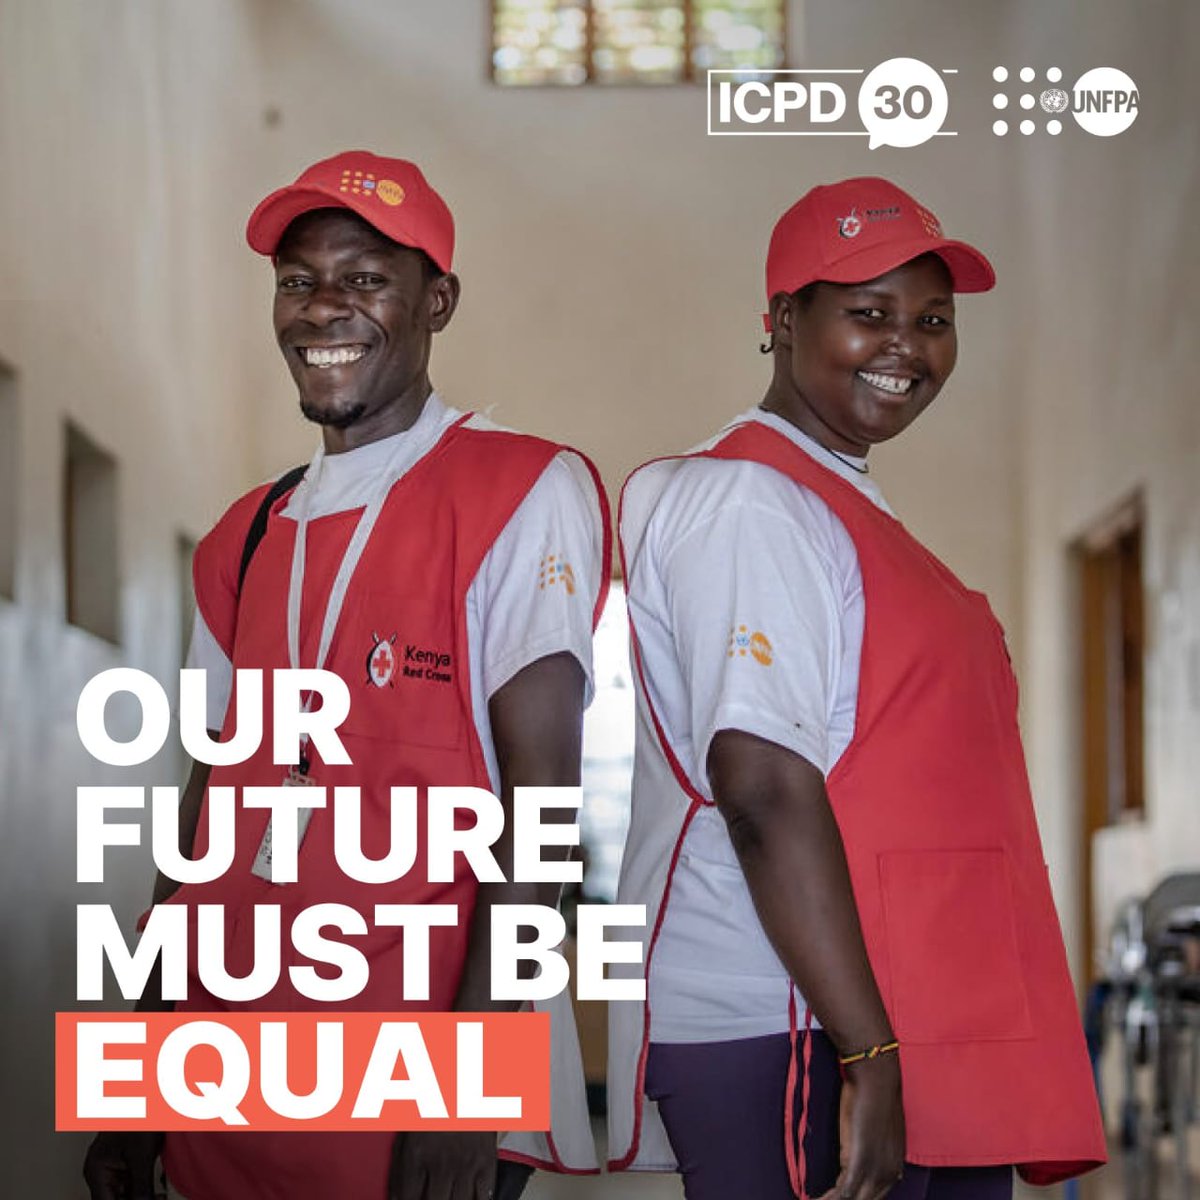 In the journey towards our shared future, let's choose equality, compassion, and understanding, so that tomorrow can be brighter for everyone RT and join @panelUnfpa in creating a world where everyone has the same rights, regardless of race, gender, or background #UNFPAYAPKe